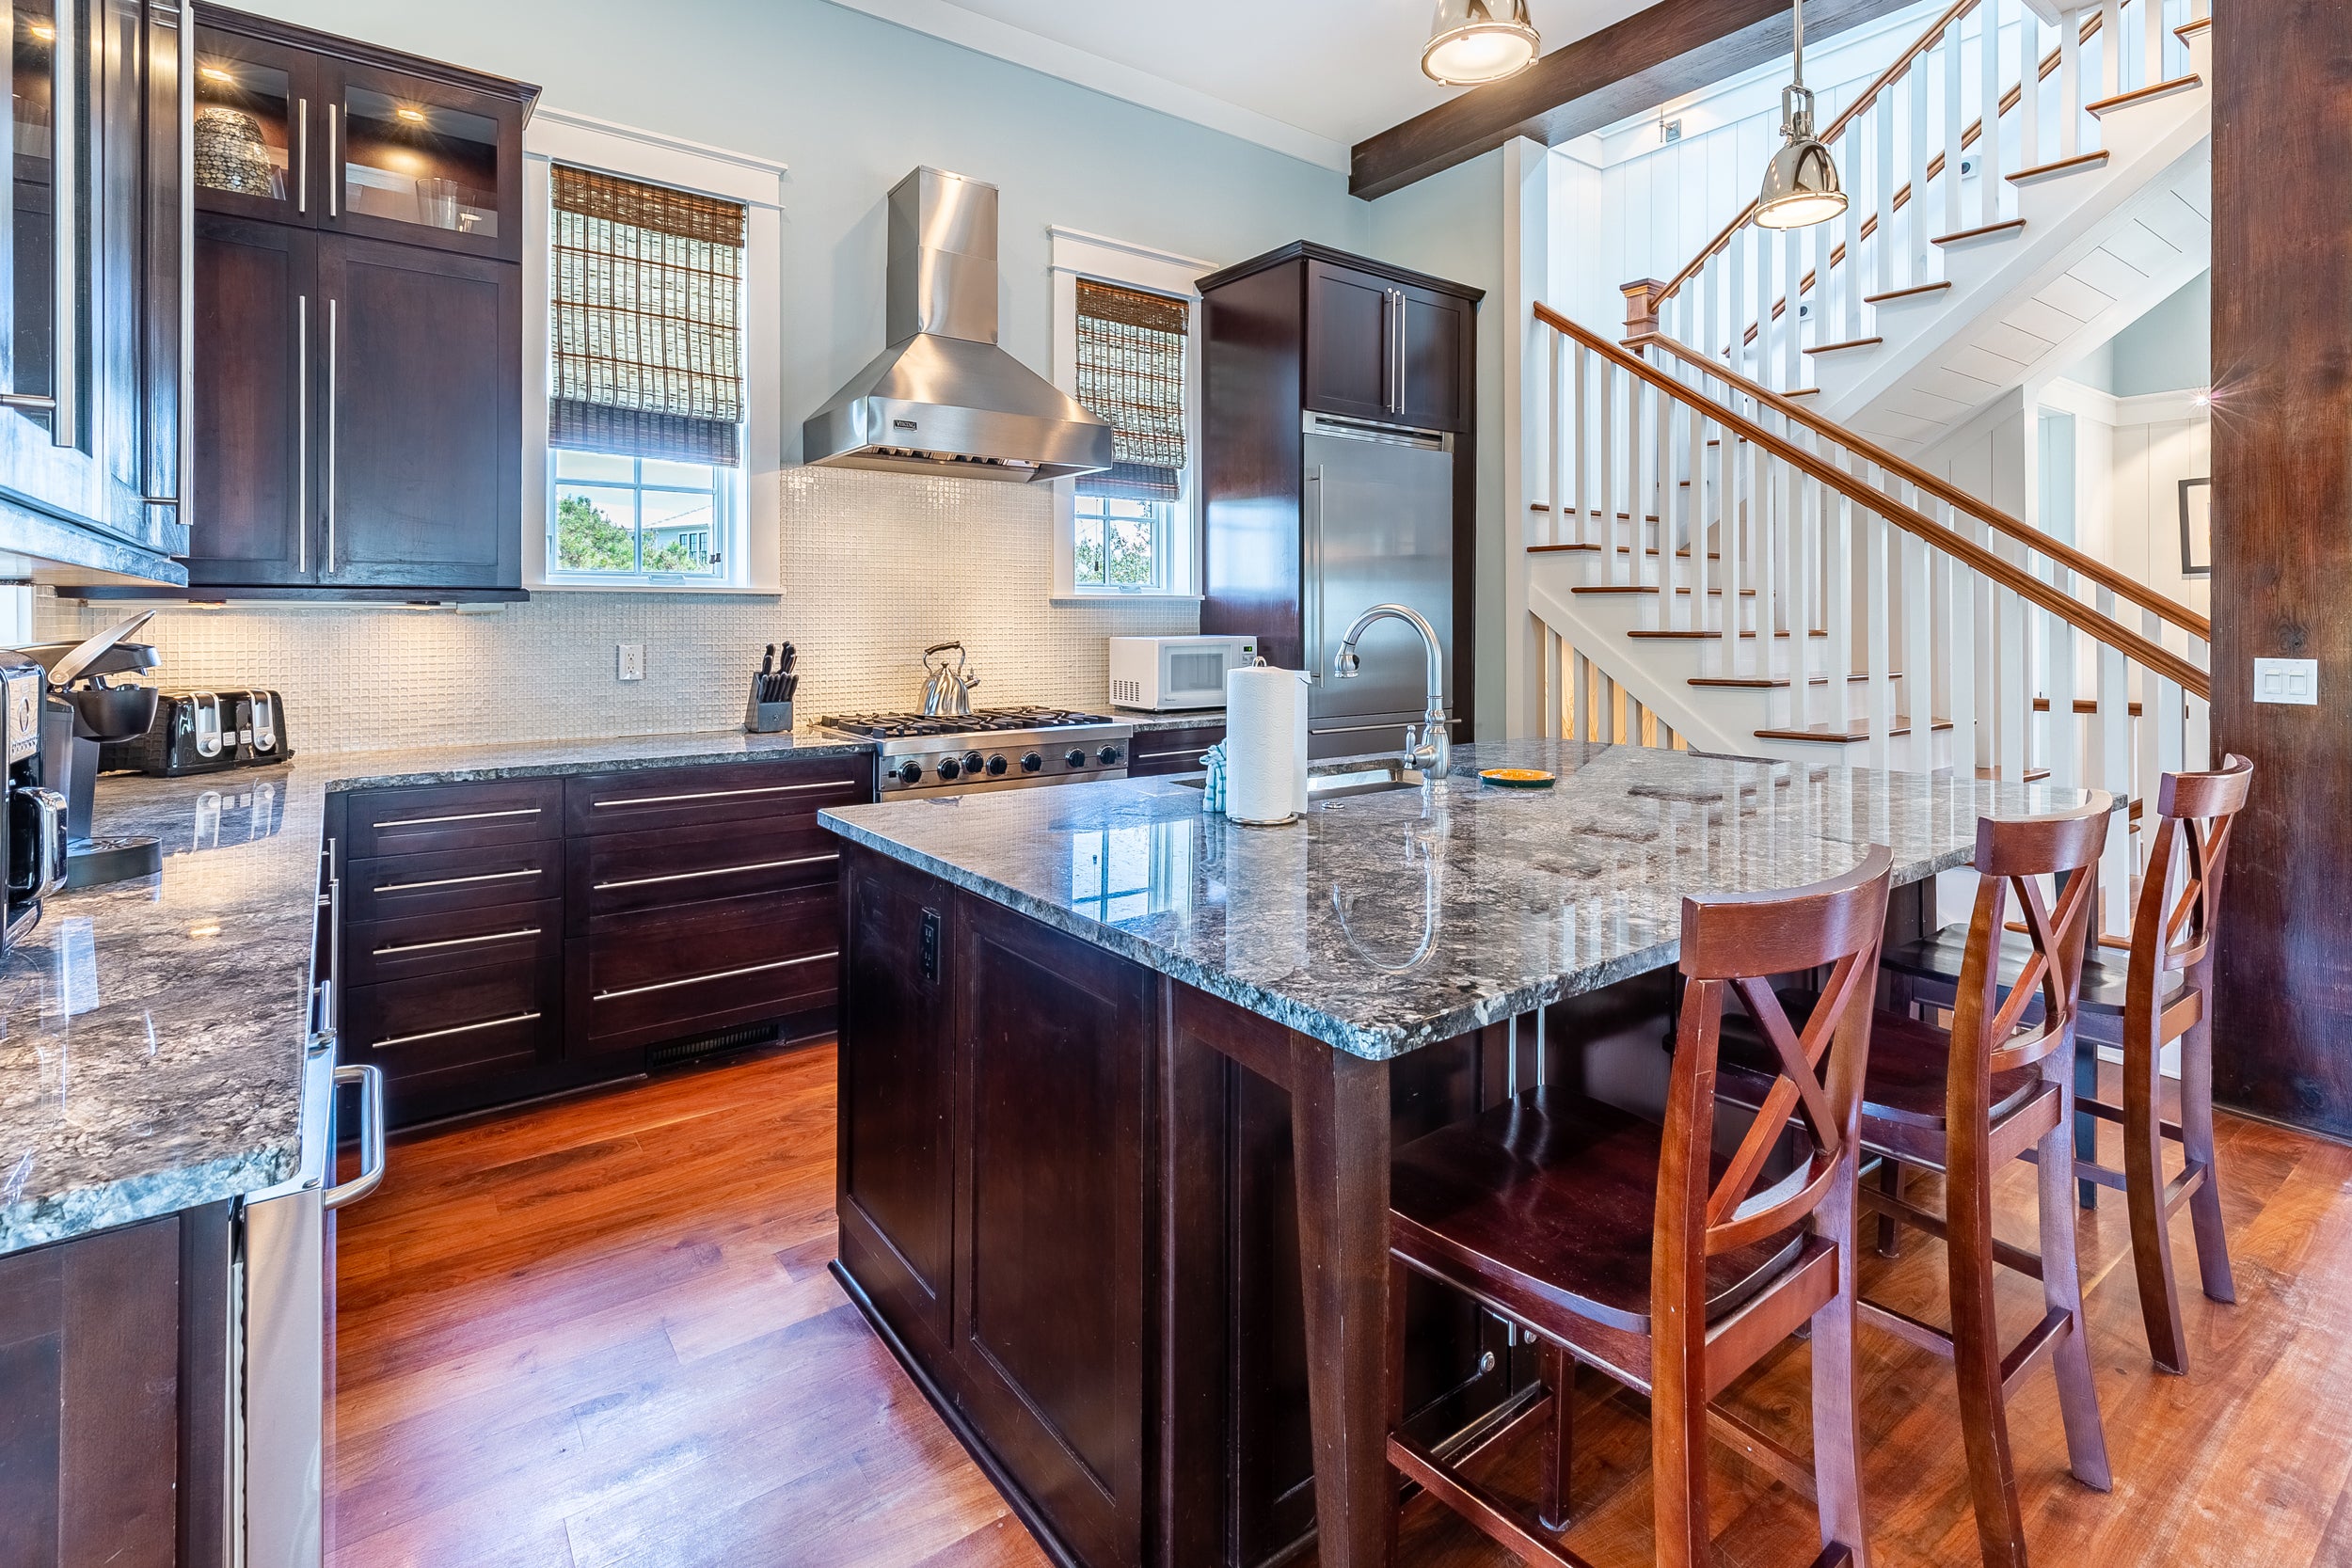 Your Chef will adore this kitchen!